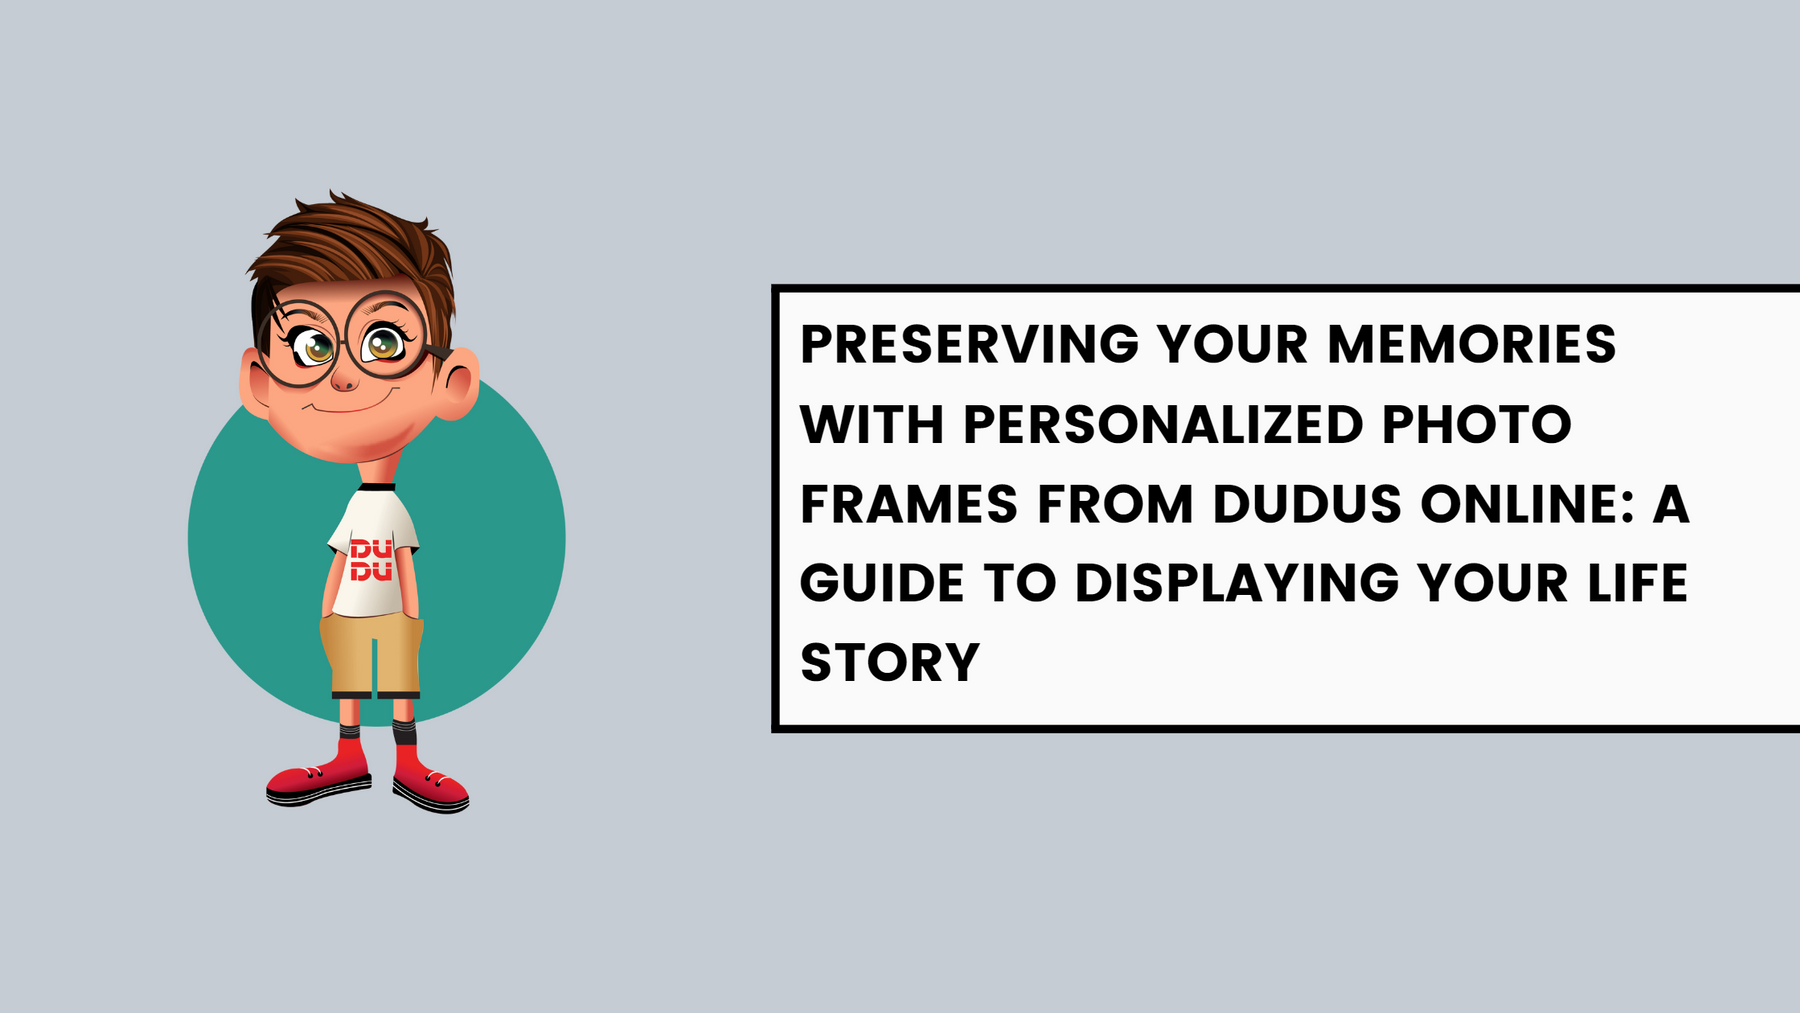 Preserving Your Memories with Personalized Photo Frames from Dudus Online: A Guide to Displaying Your Life Story